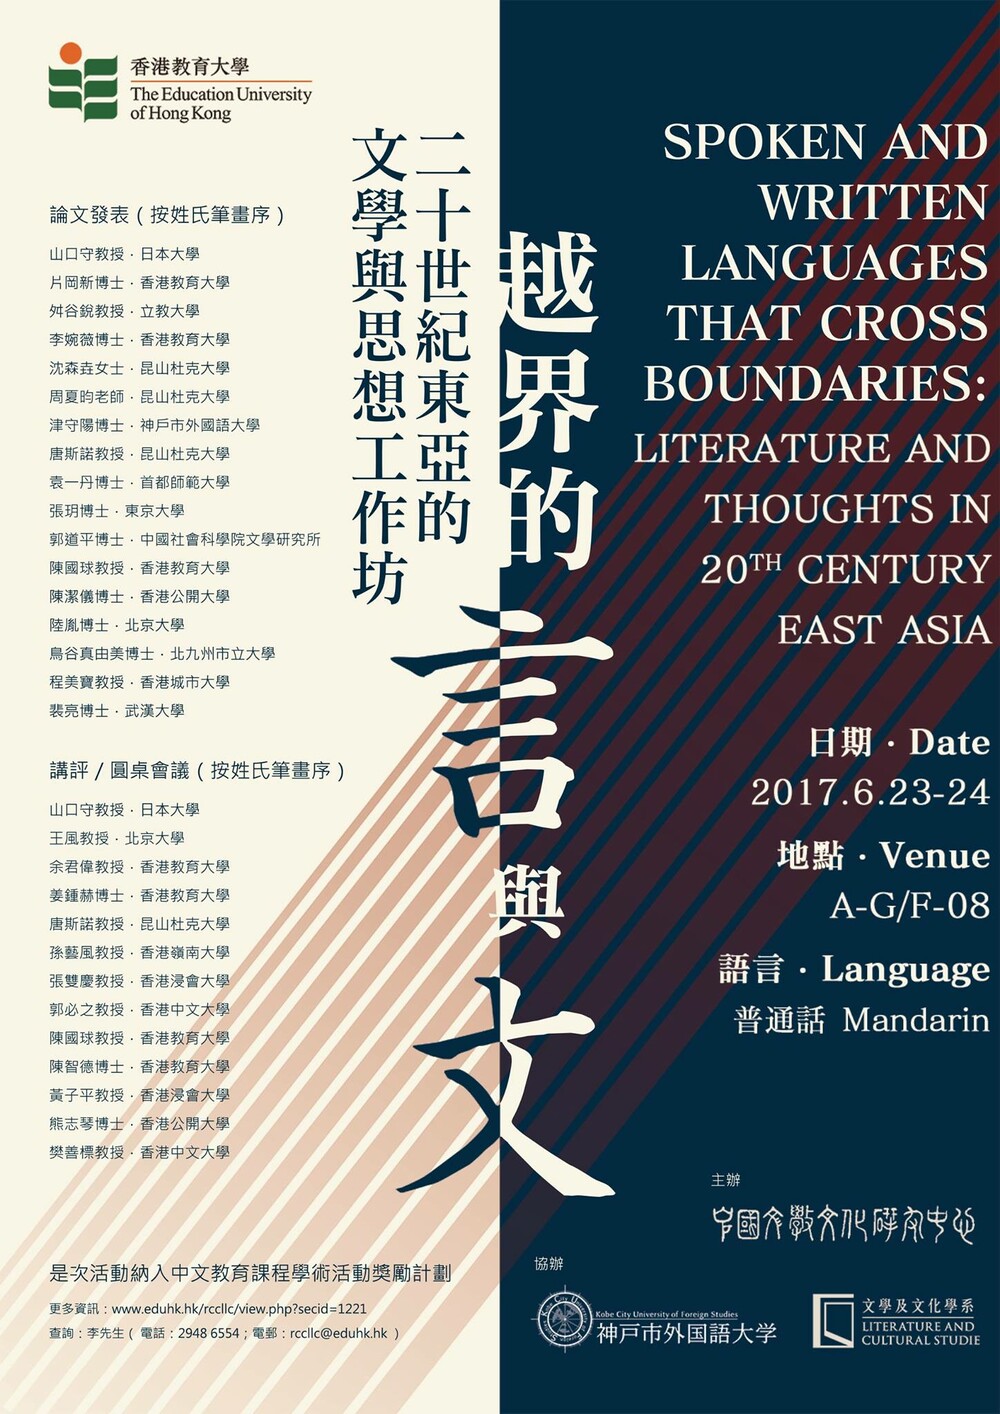 Spoken and Written Languages that cross boundaries:  Literature and Thoughts in 20th Century East Asia